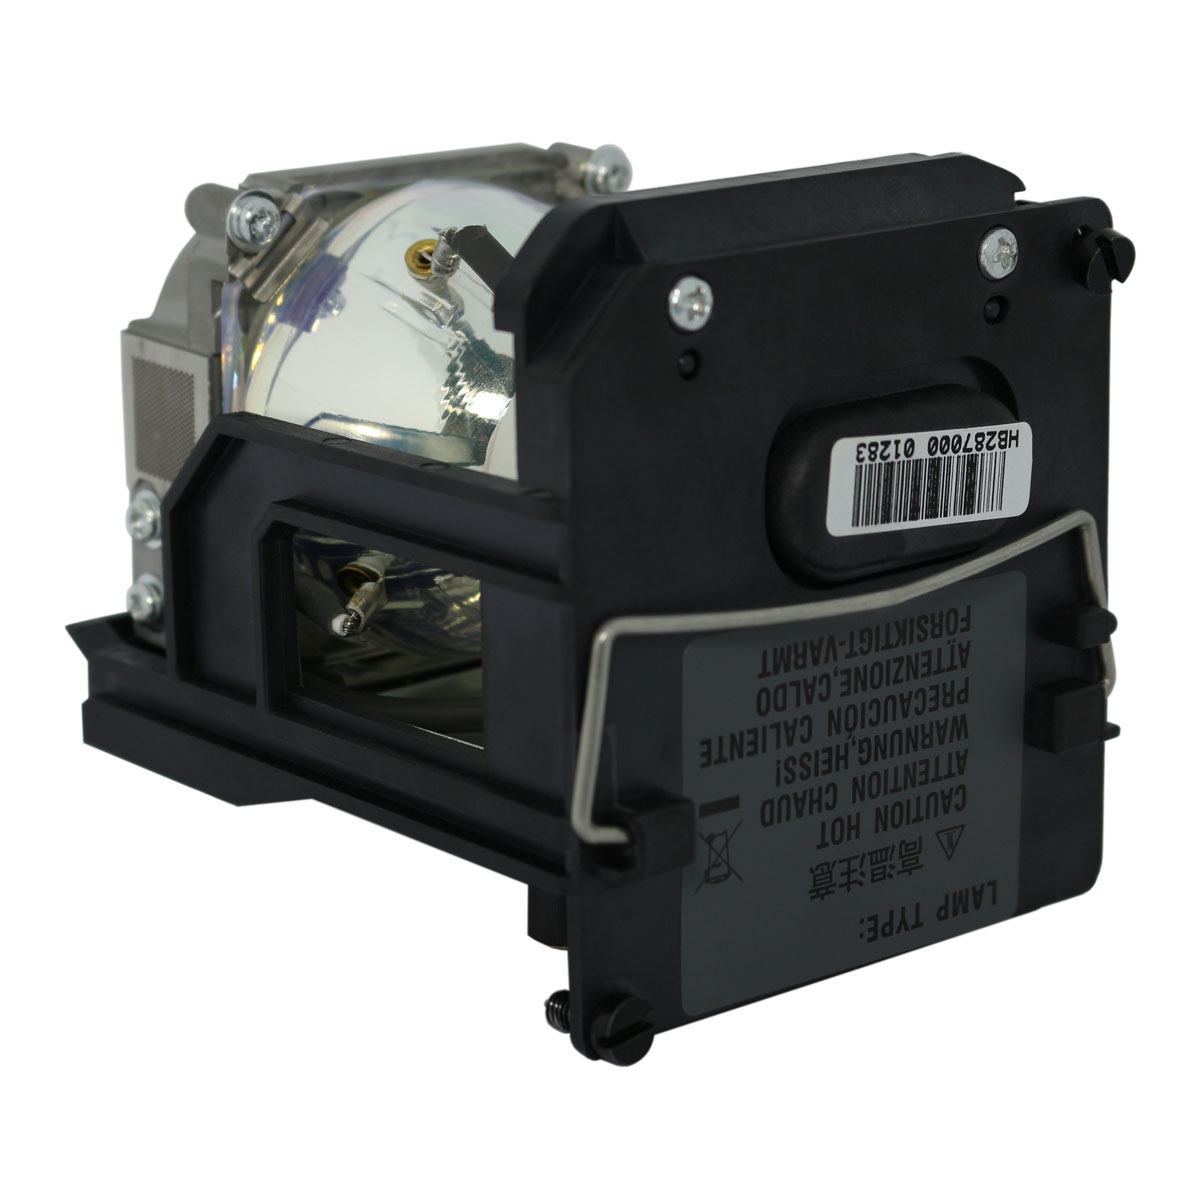 Buyquest WT610E  OEM Replacement Projector Lamp for NEC. Includes New Ushio NSH 275W Bulb and Housing